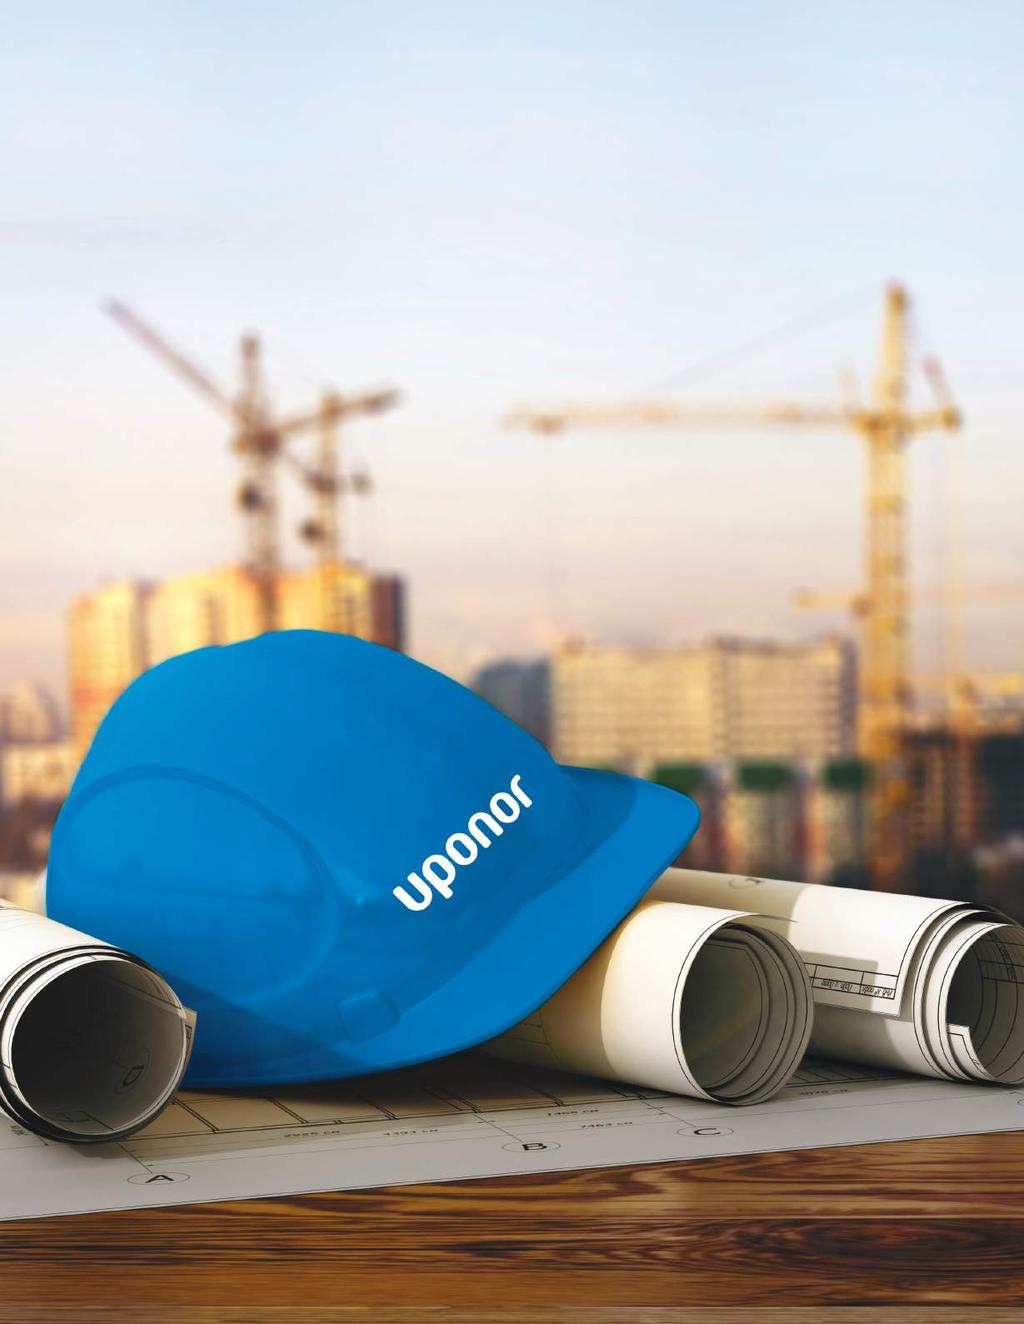 Connect with Uponor. Connect with confidence. Uponor, Inc.